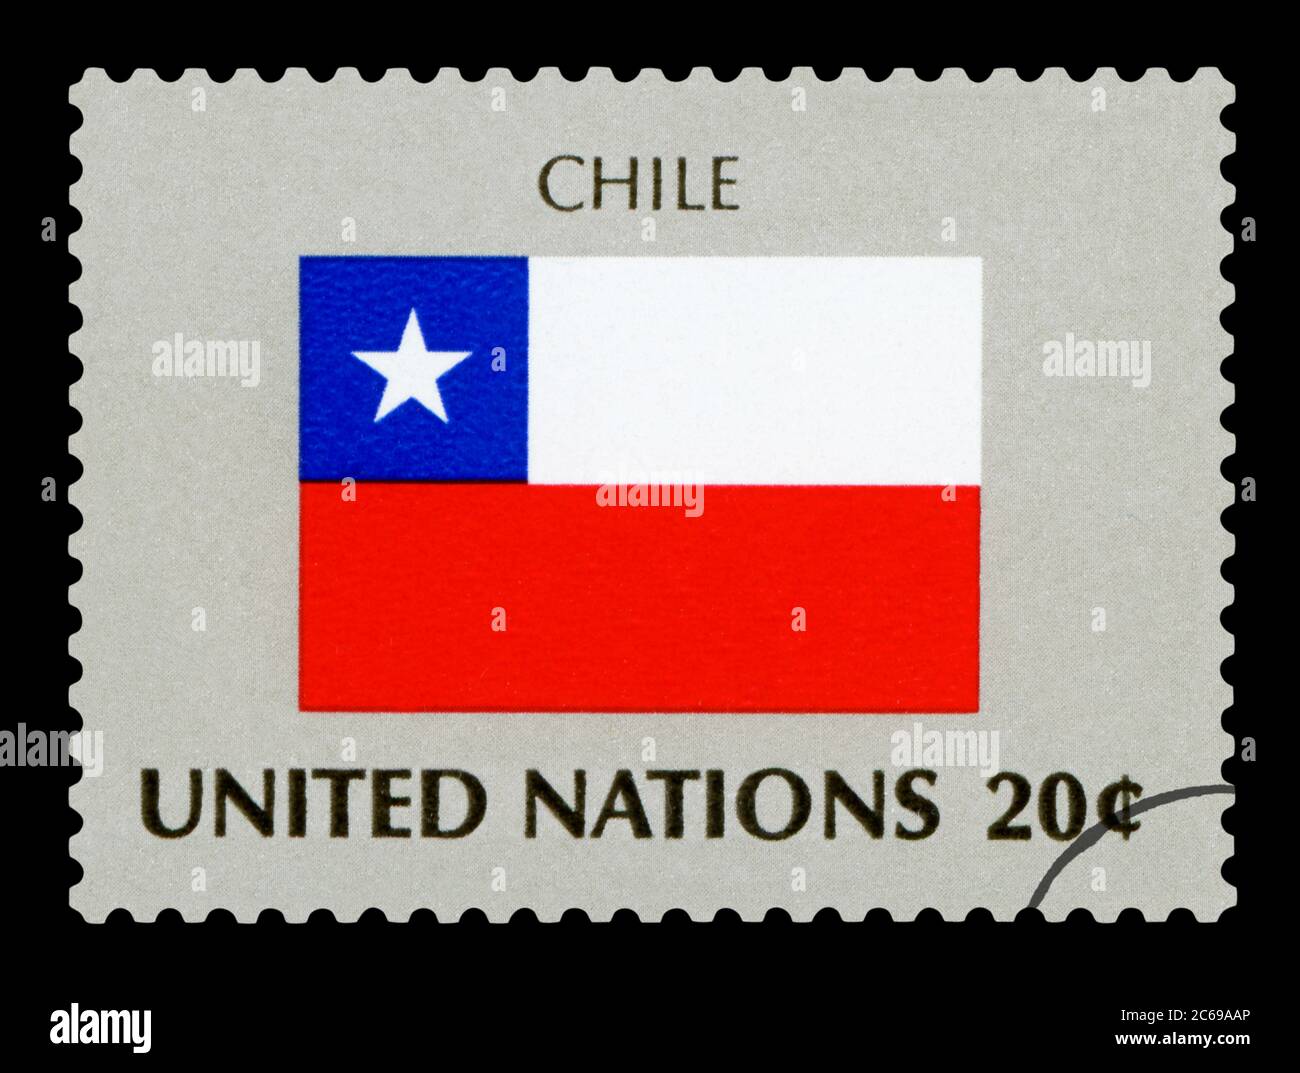 CHILE - Postage Stamp of Chile national flag, Series of United Nations, circa 1984. Isolated on black background. Stock Photo